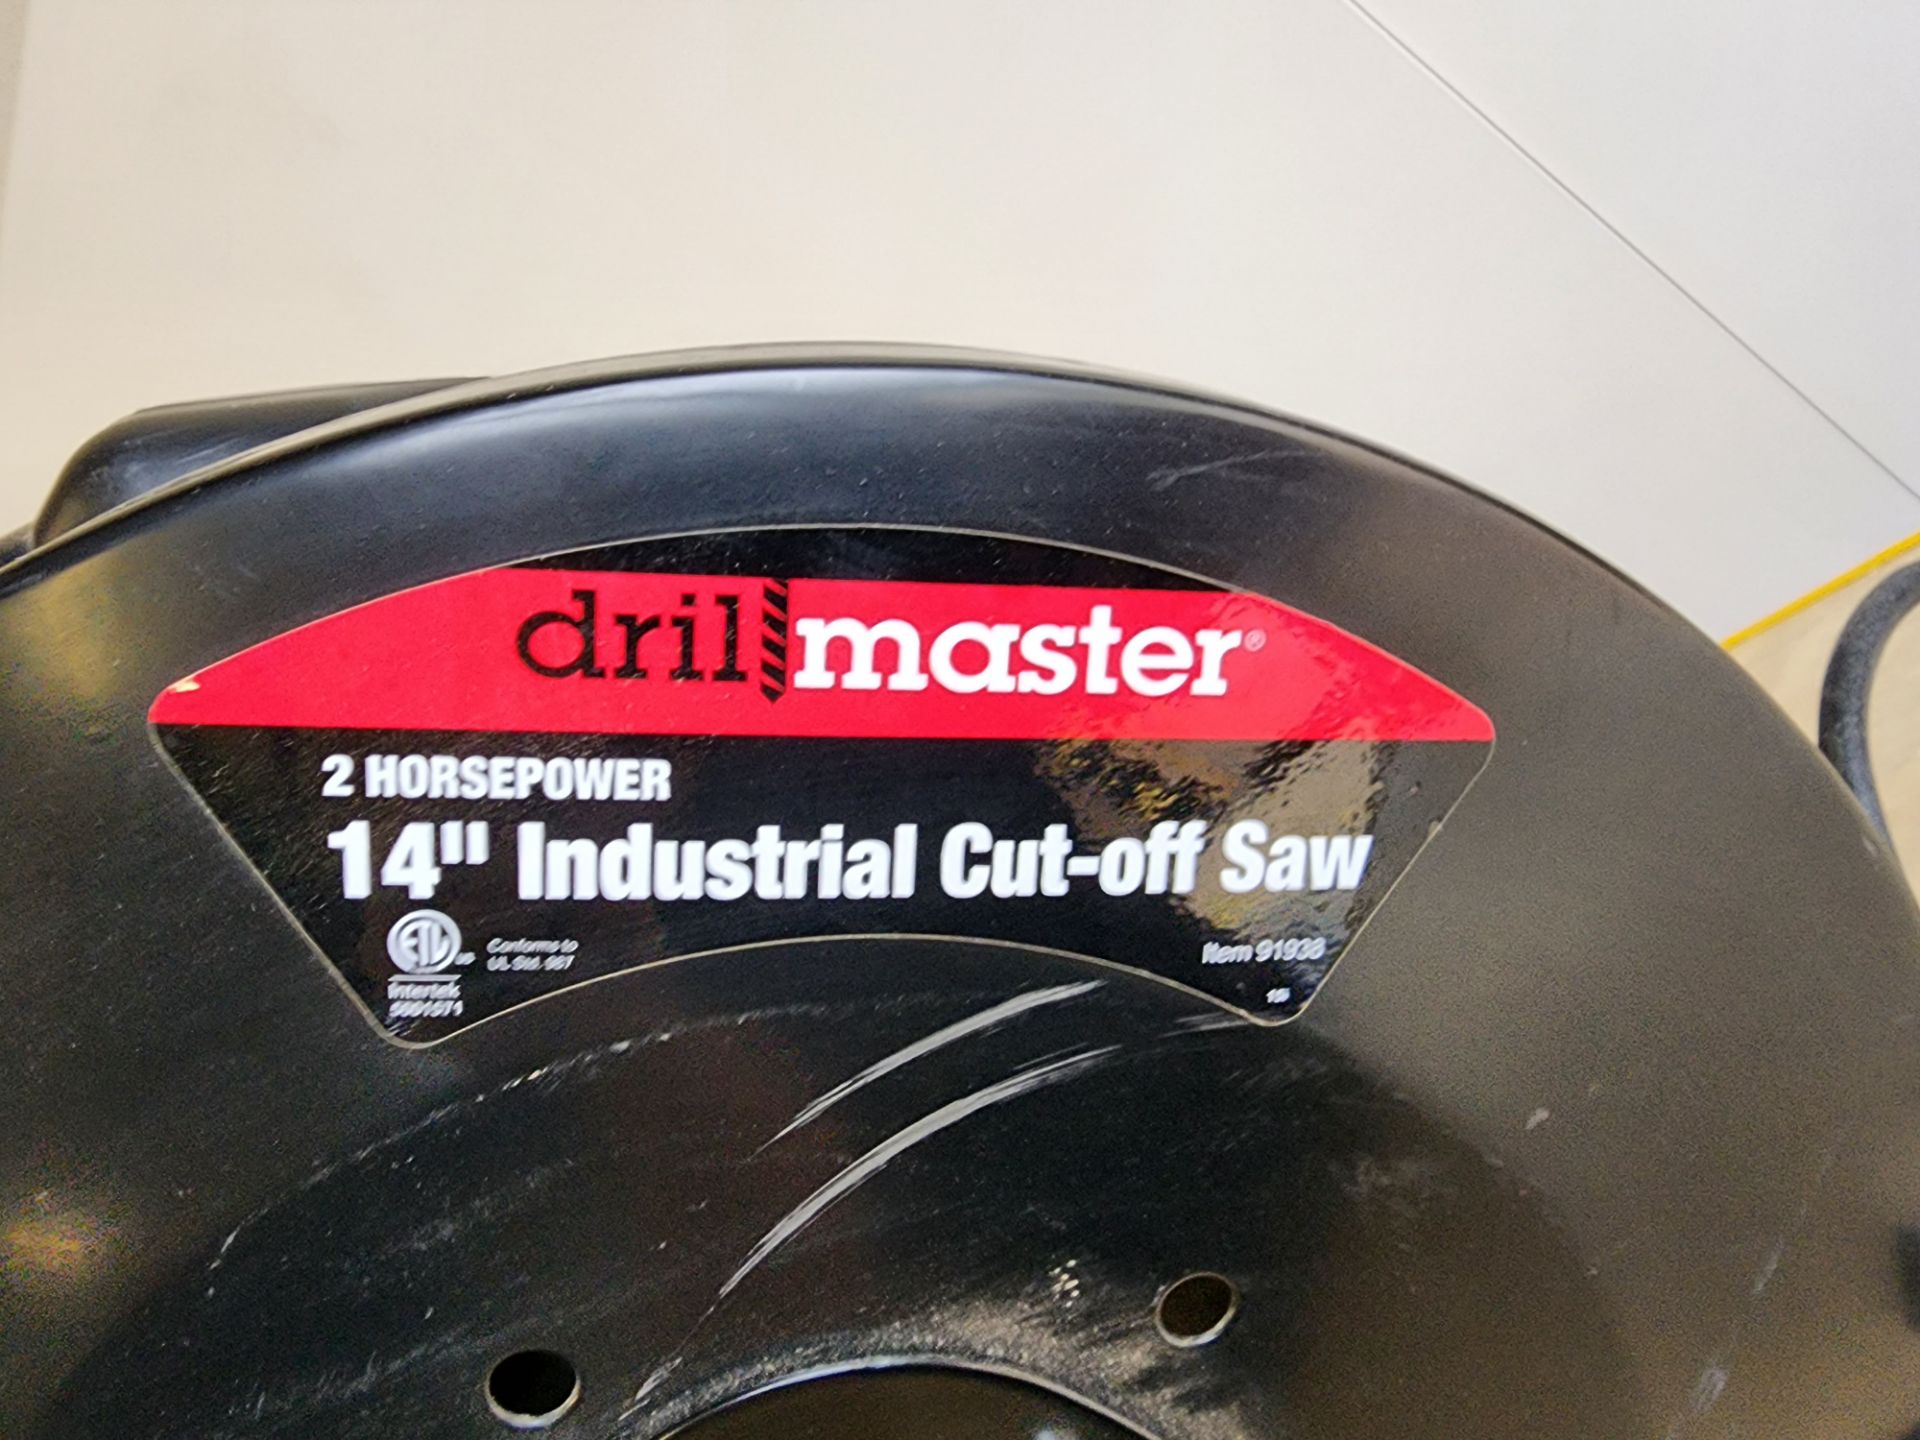 Chicago Electric Drill Master 14" Industrial Cut-off Saw, S/N 370331739; w/Instruction Manual - Image 4 of 4